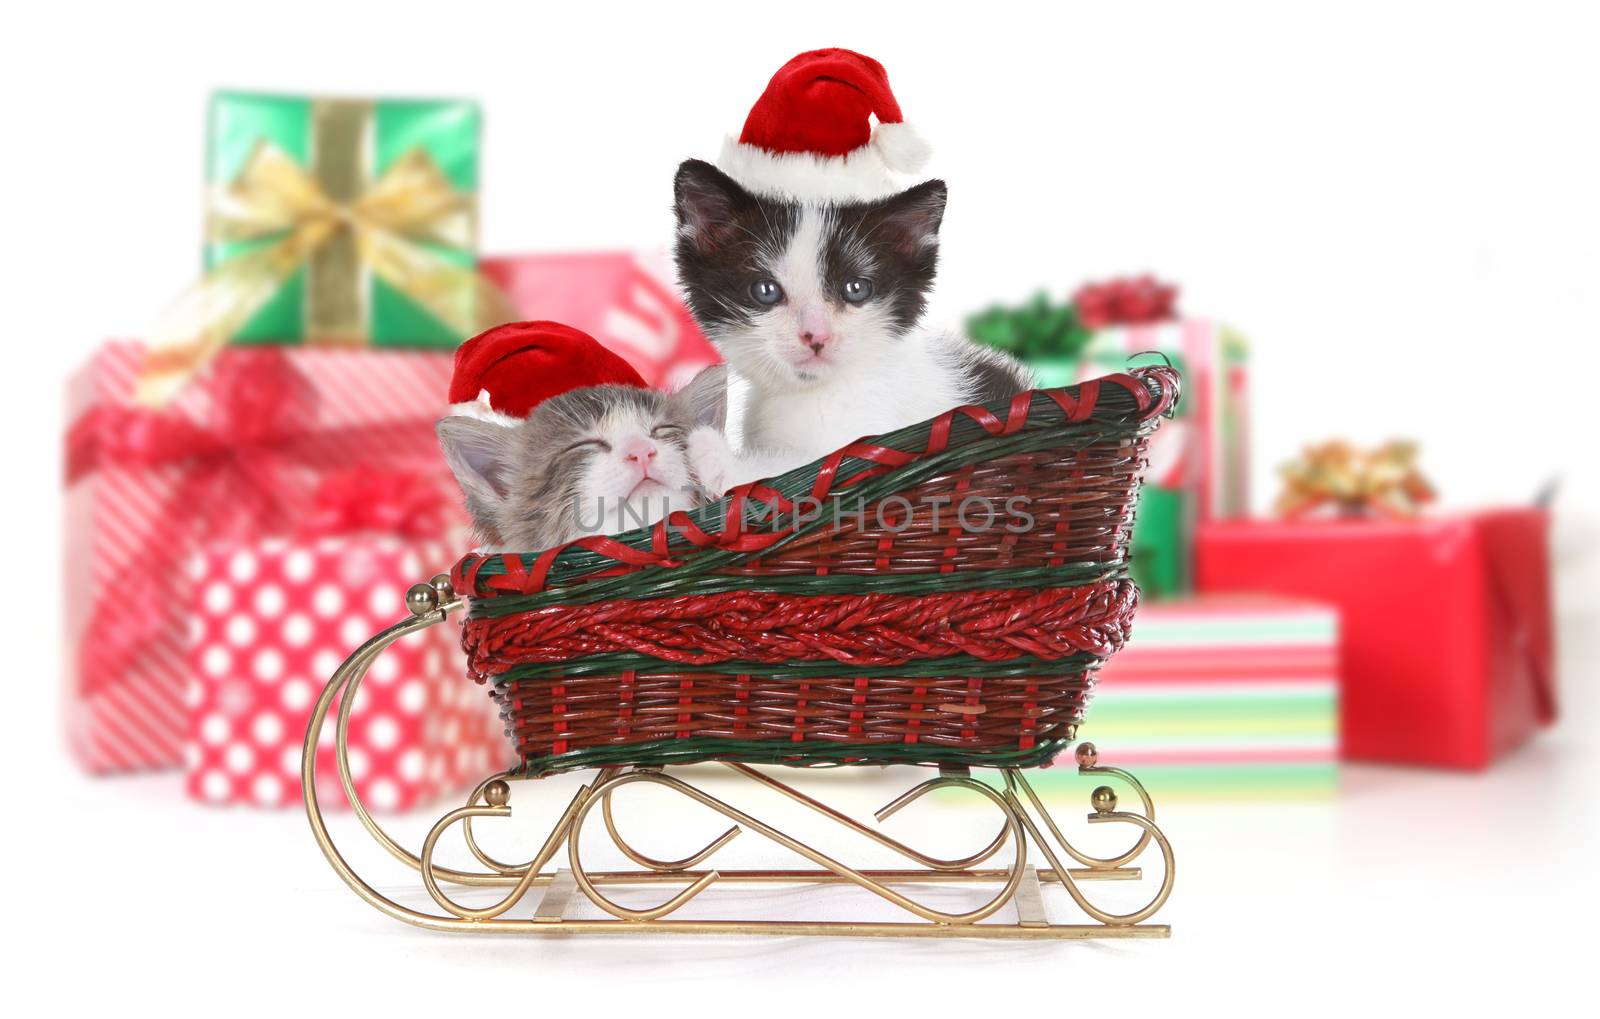 Cute Adorable Kittens Surrounded by Christmas Gifts in Sleigh